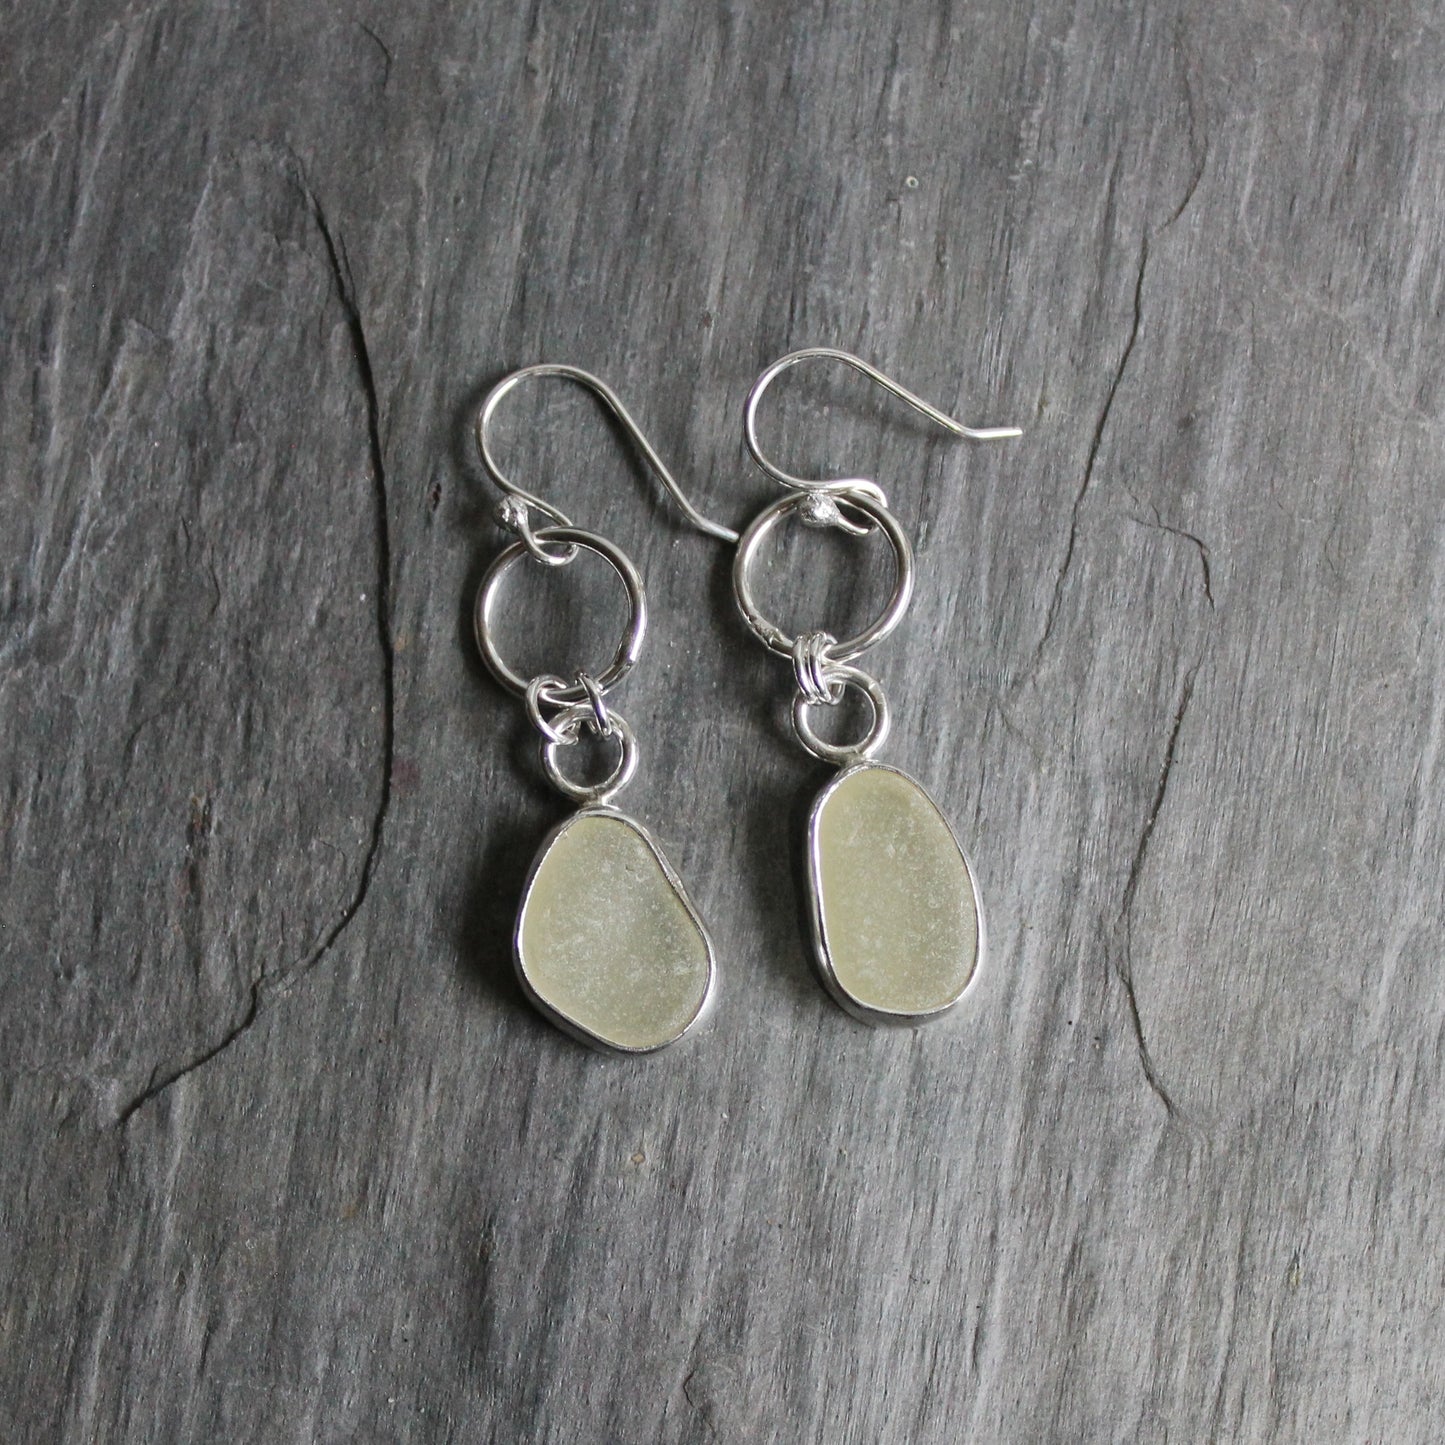 These dangly earrings have pale yellow sea glass set in a fine & sterling silver bezel setting attached to a 10mm round link on handmade ear wires. 